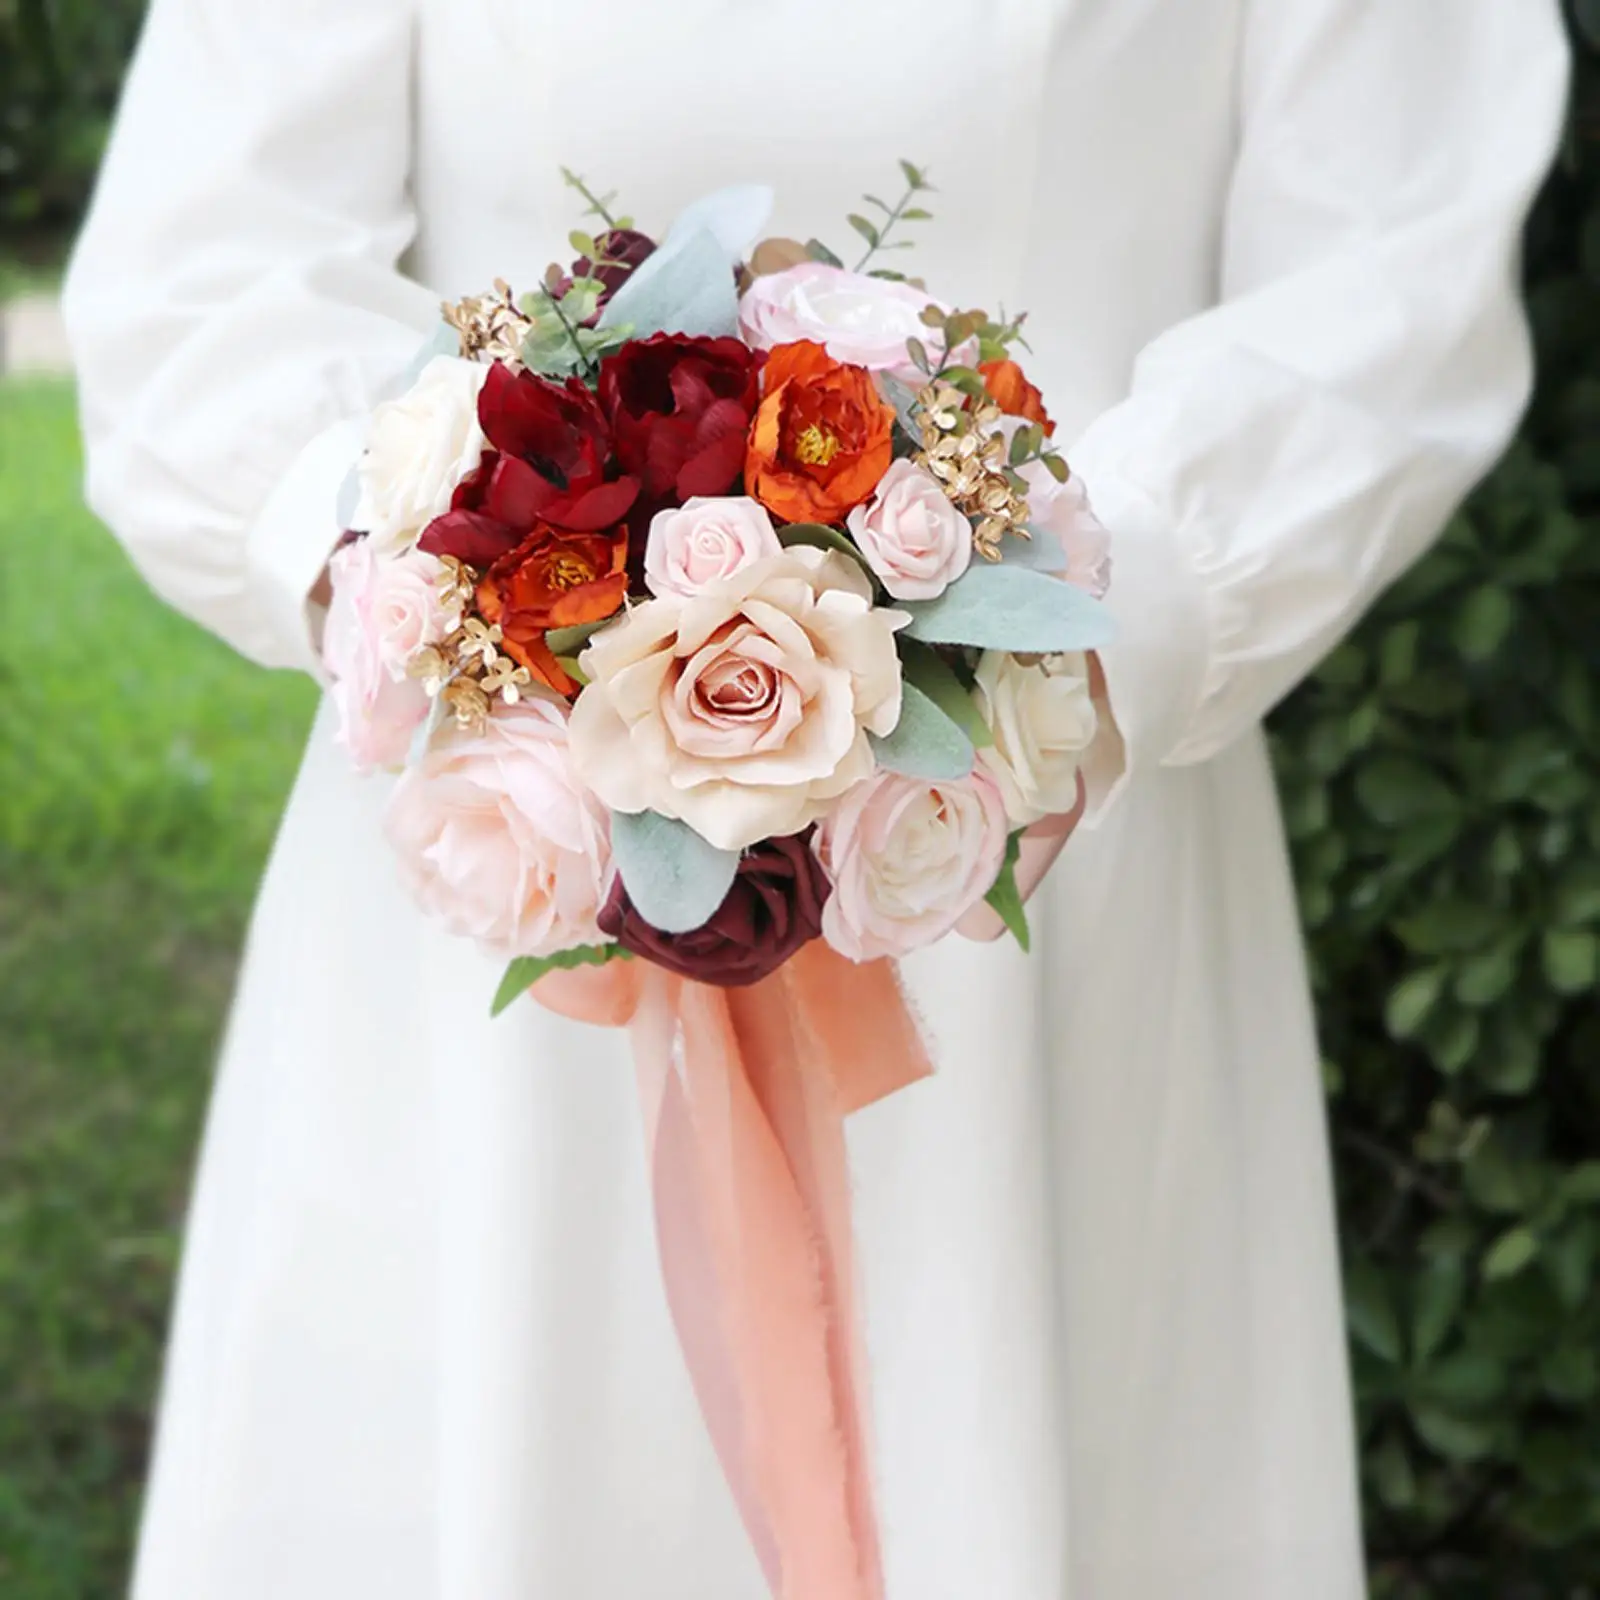 Wedding Bouquet Artificial Bridal Flowers for Graduation Ceremony Photo Proposal Girl